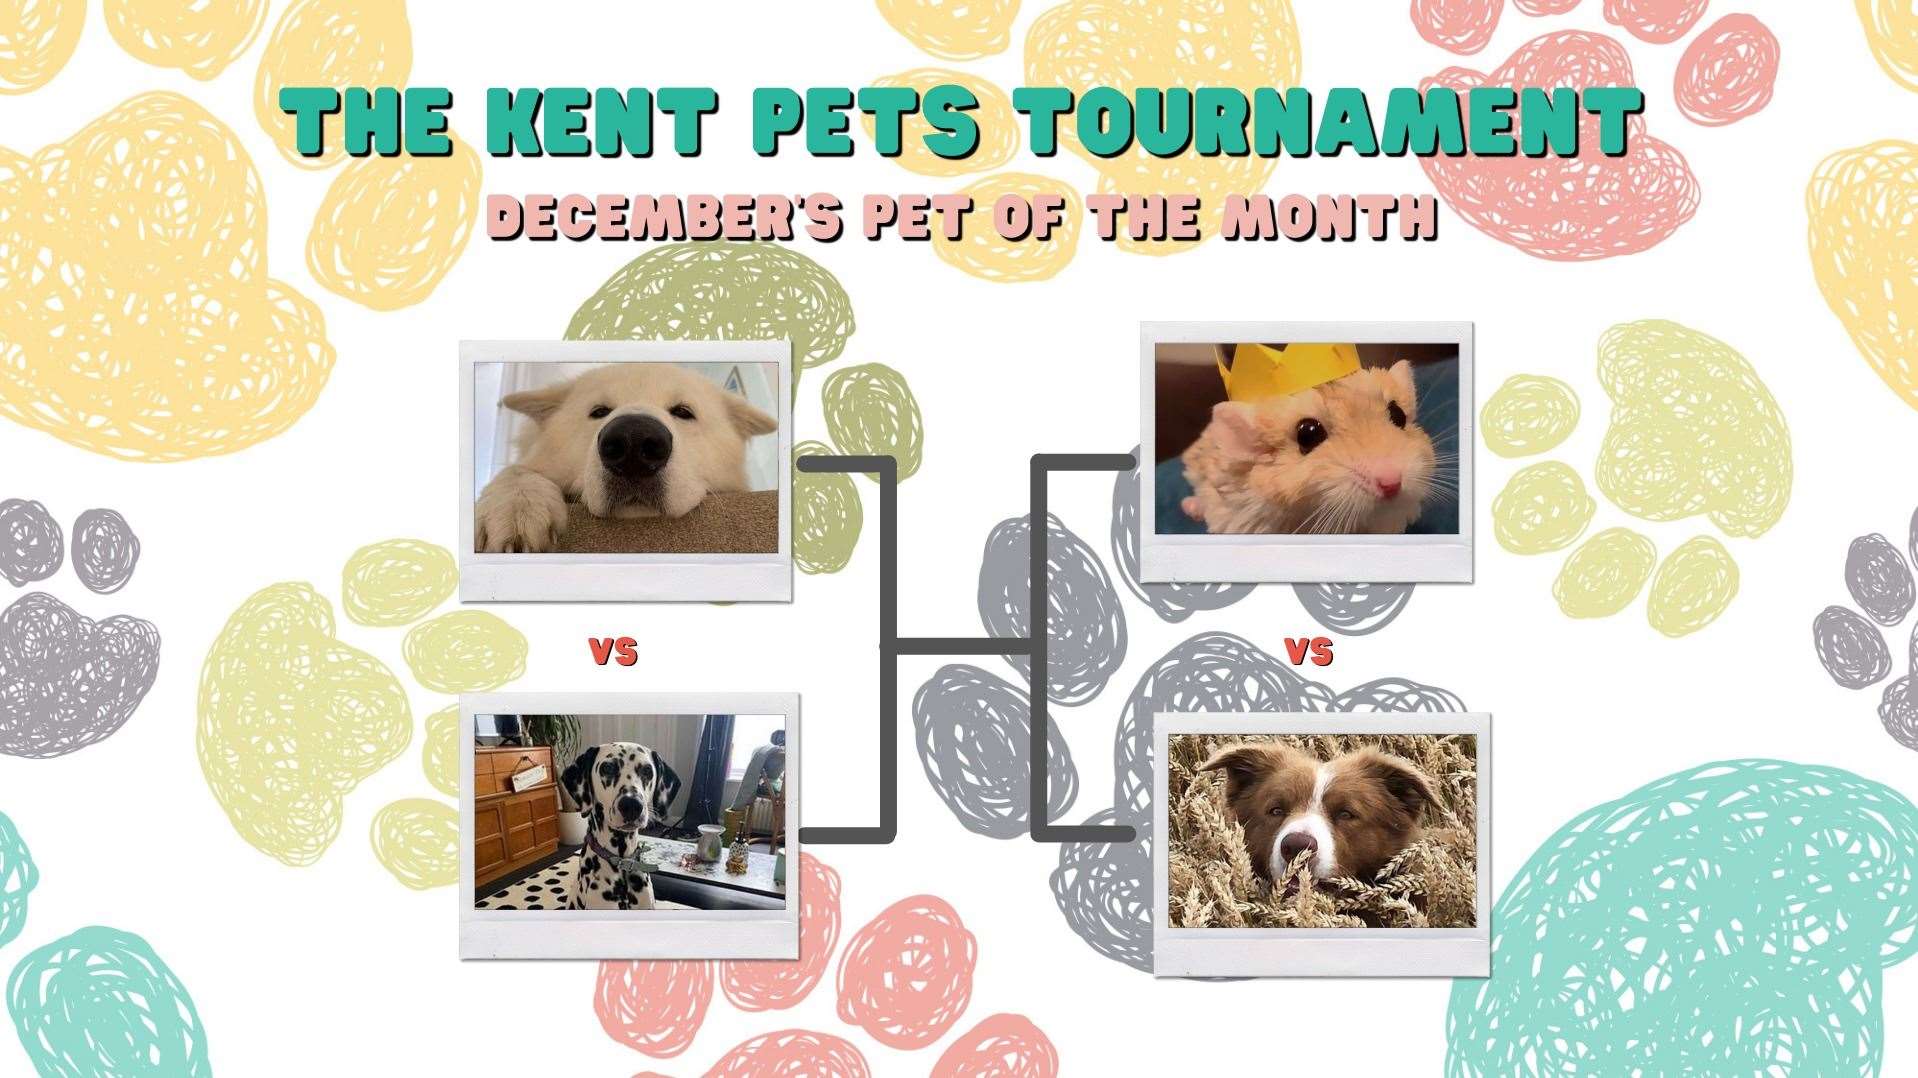 Who do you think should go into the final of Kent Pets Tournament?